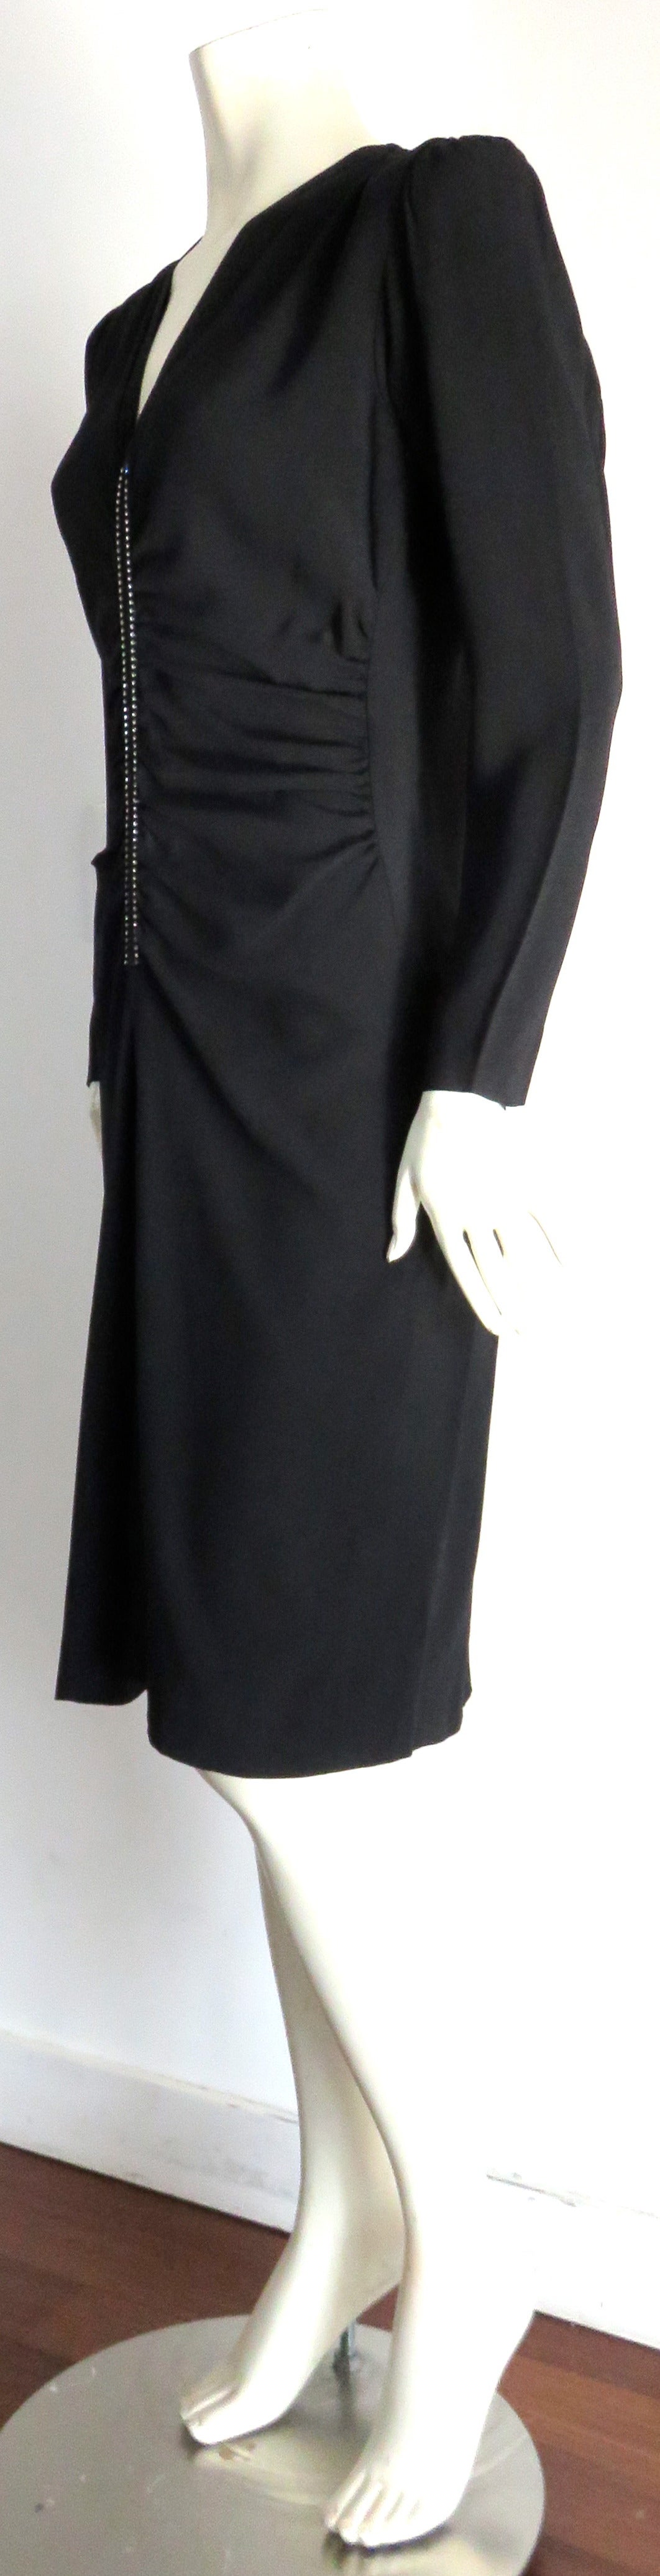 1970's YVES SAINT LAURENT 40's style cocktail dress YSL For Sale 3